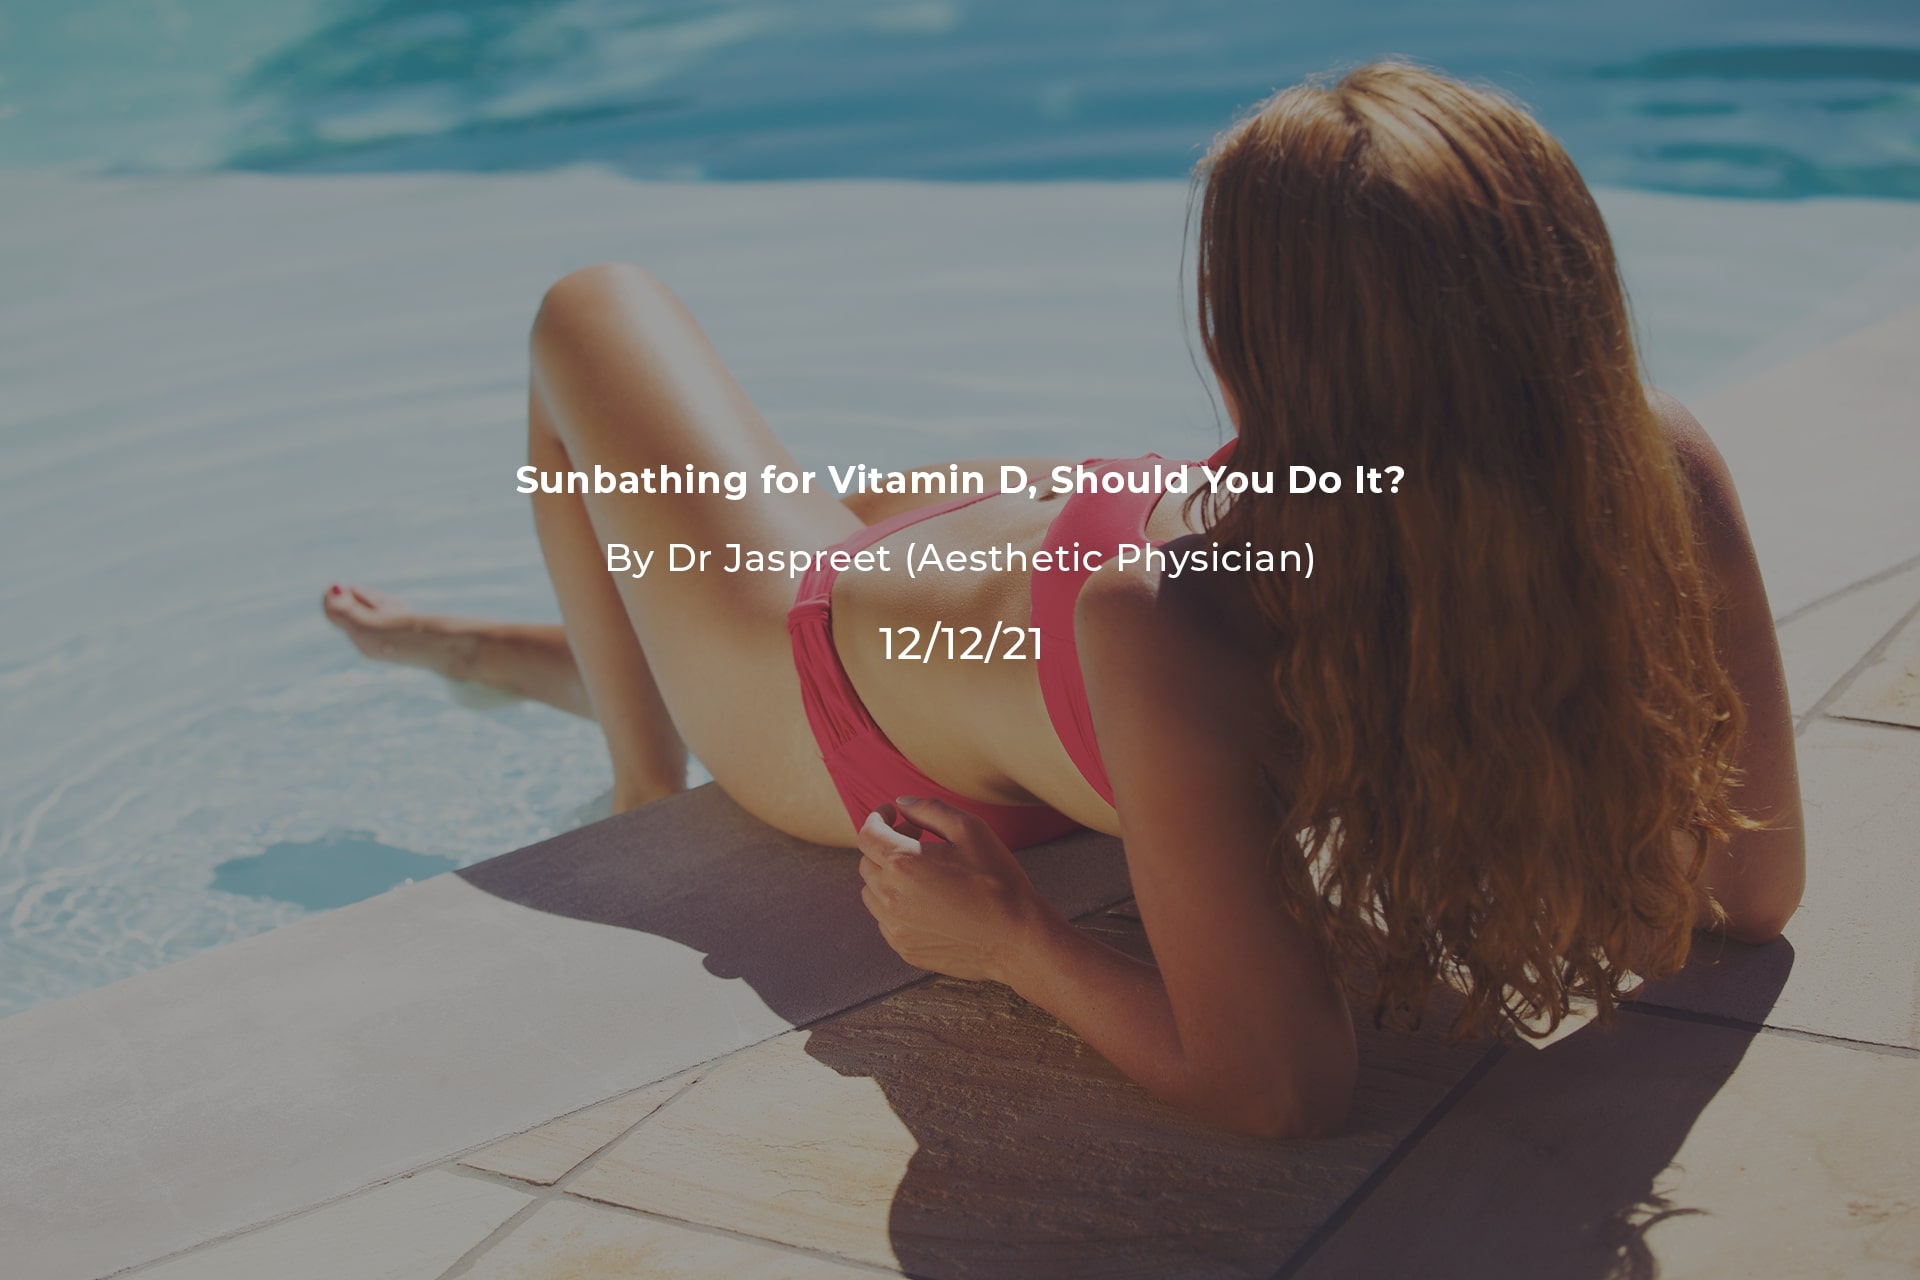 Sunbathing for Vitamin D, Should You Do It?